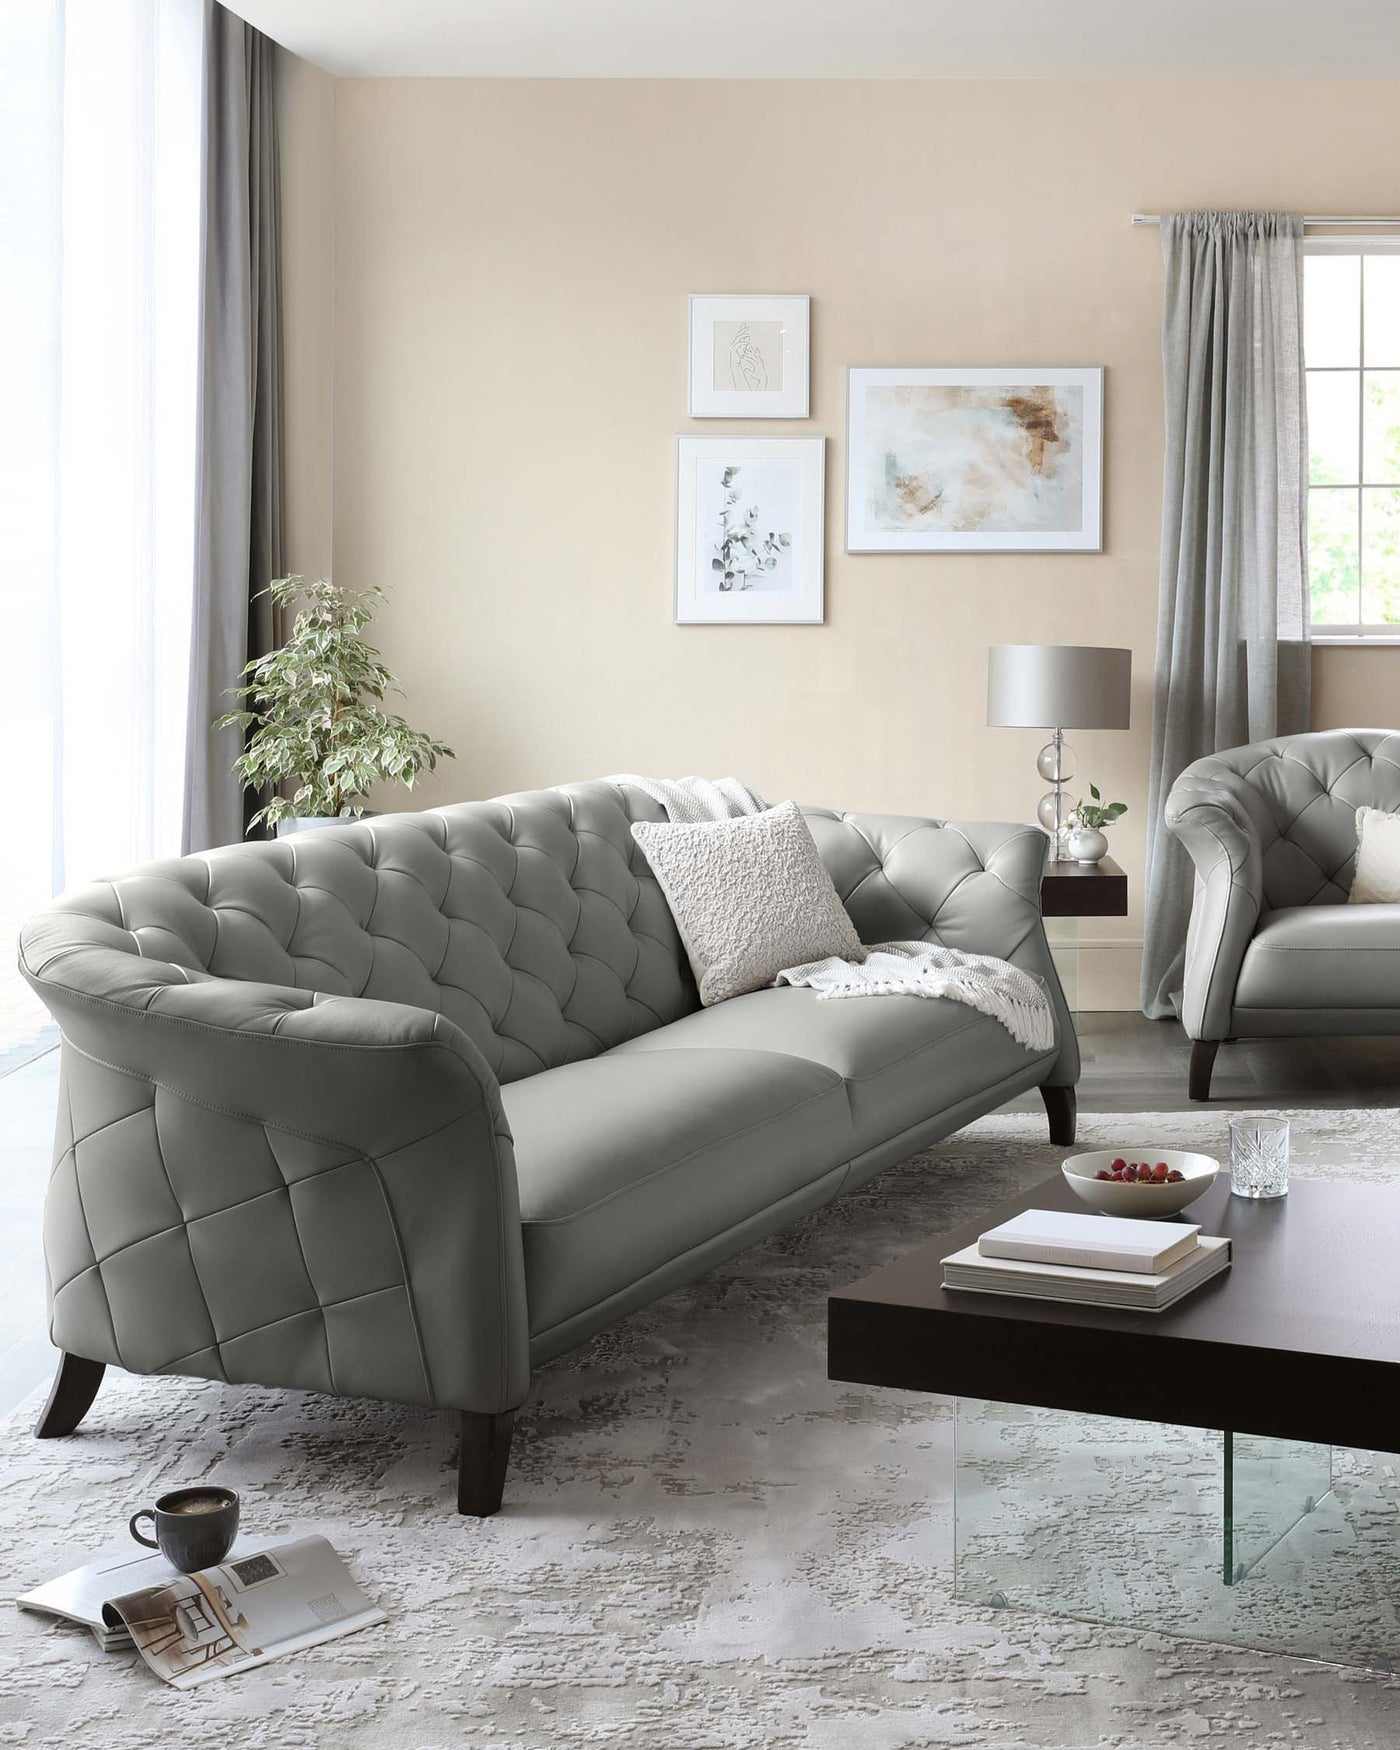 Elegant living room featuring a tufted grey upholstered sofa with curved armrests, complemented by a matching armchair. In front of the sofa is a modern rectangular coffee table with a dark wood top and transparent glass legs. A textured off-white area rug underlines the furniture set, adding softness and contrast to the room's neutral palette.